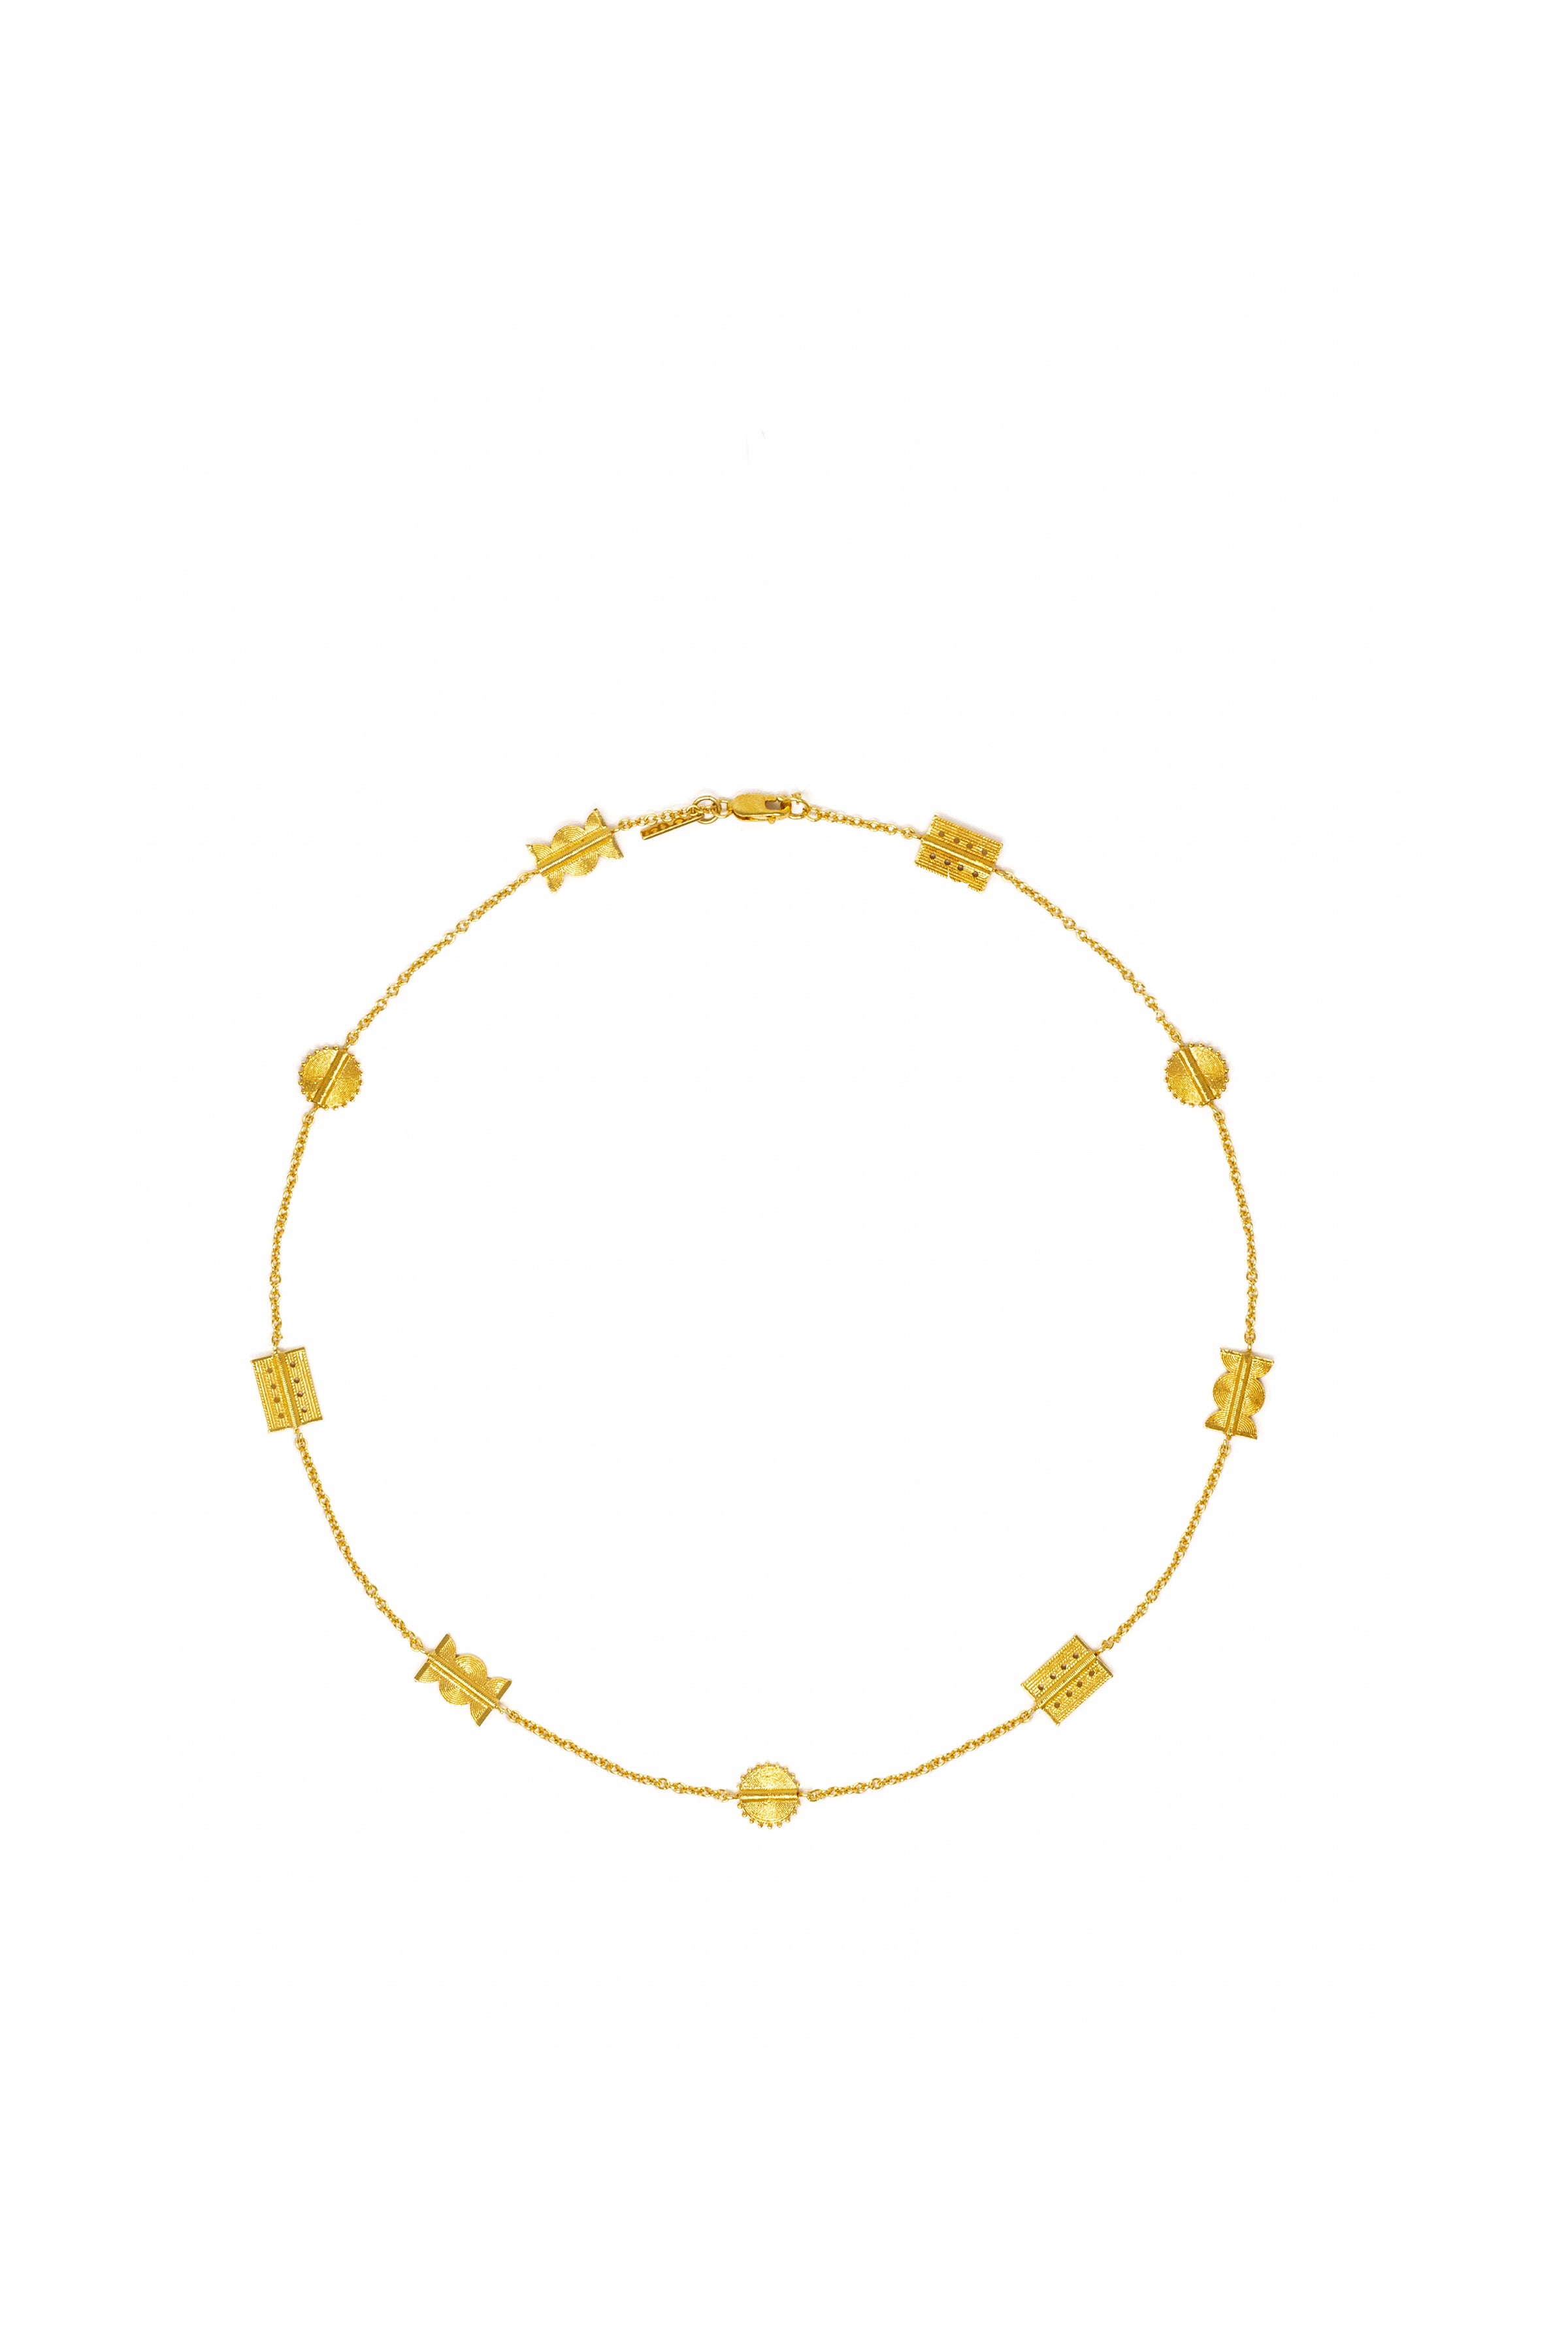 THE BAULE Staccato Choker Necklace